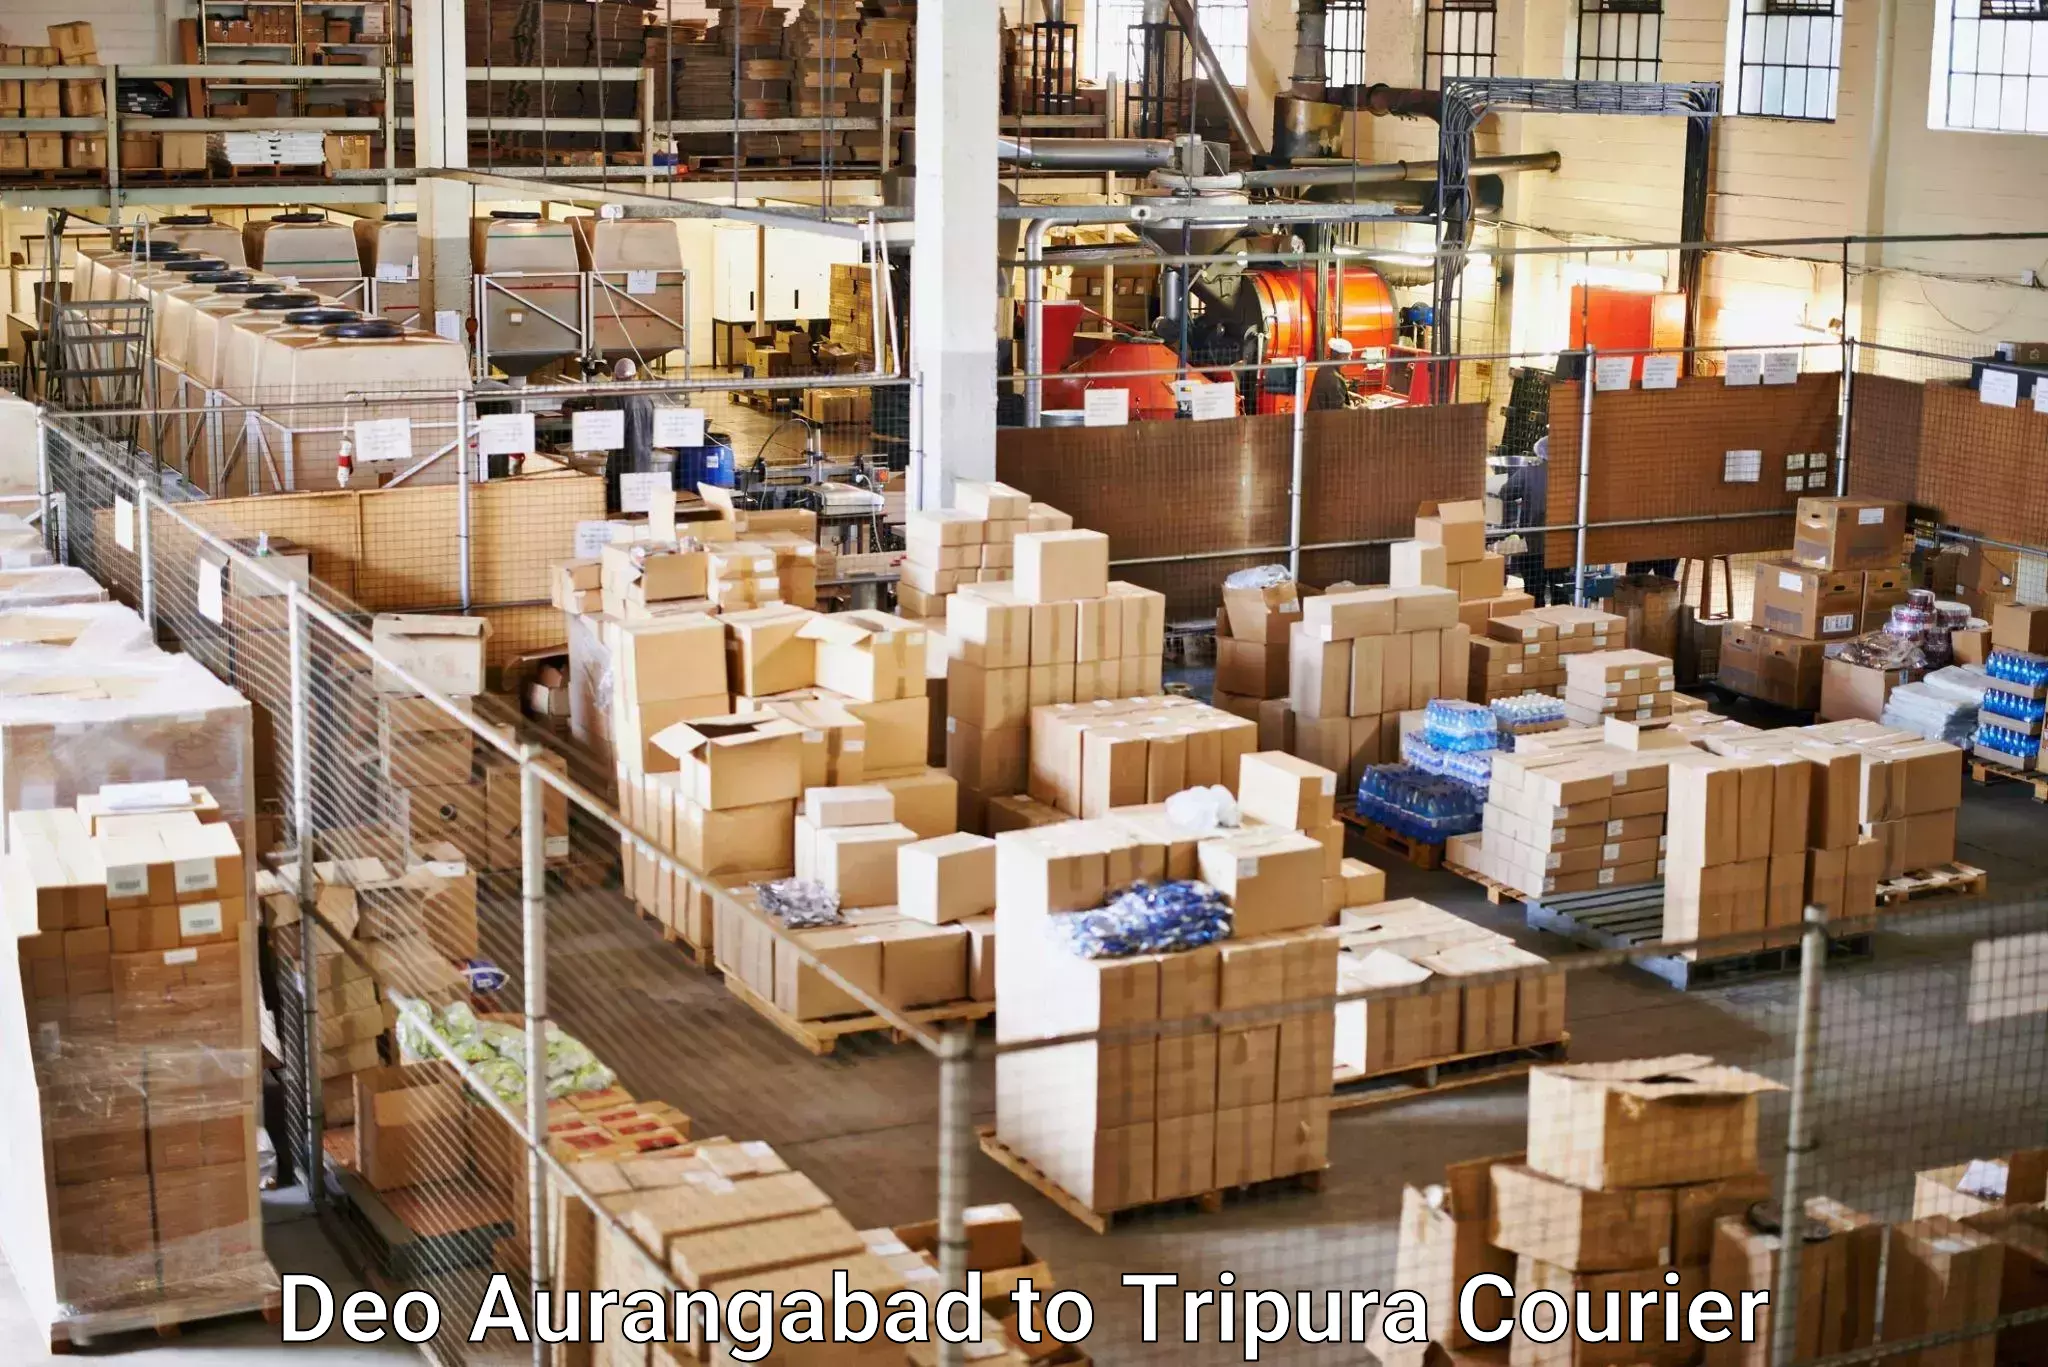 Fast-track shipping solutions Deo Aurangabad to Tripura